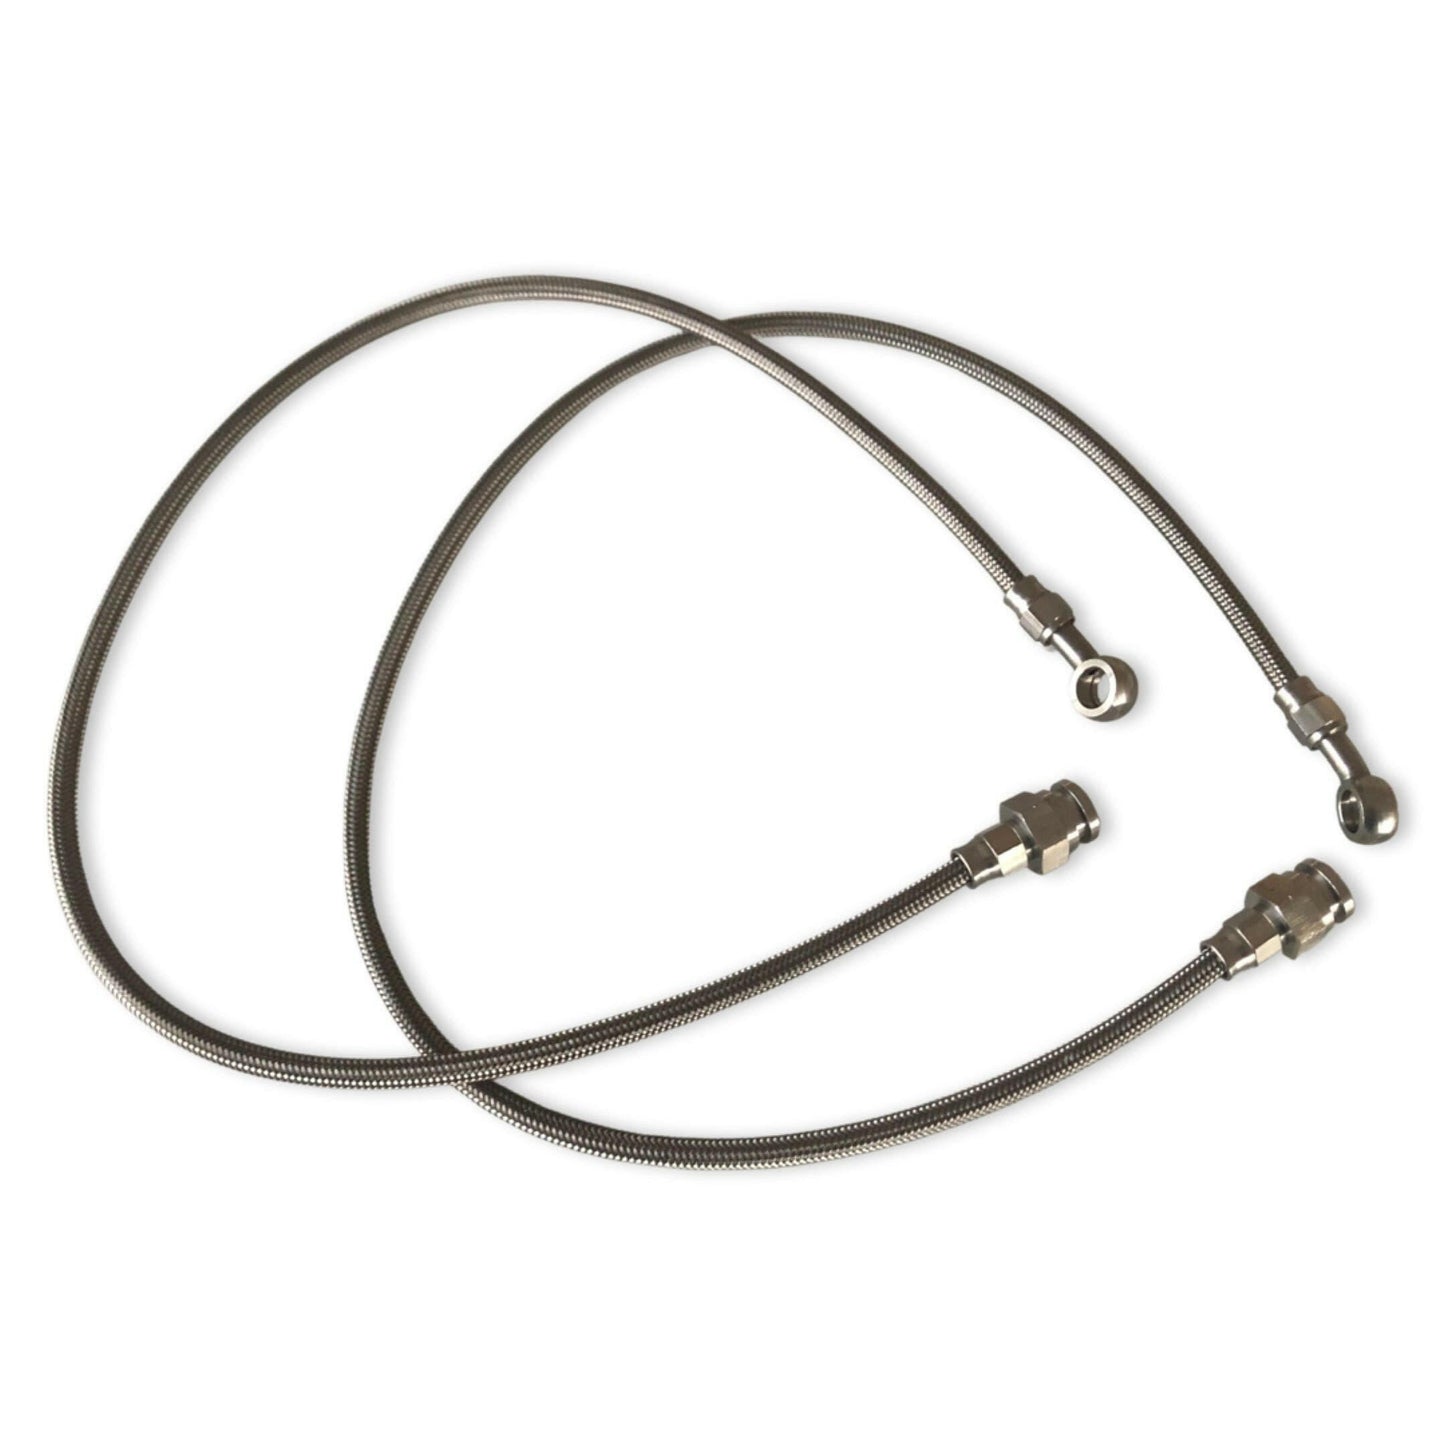 Rear Extended Stainless Steel Braided Brake Lines for Musso (Pair).